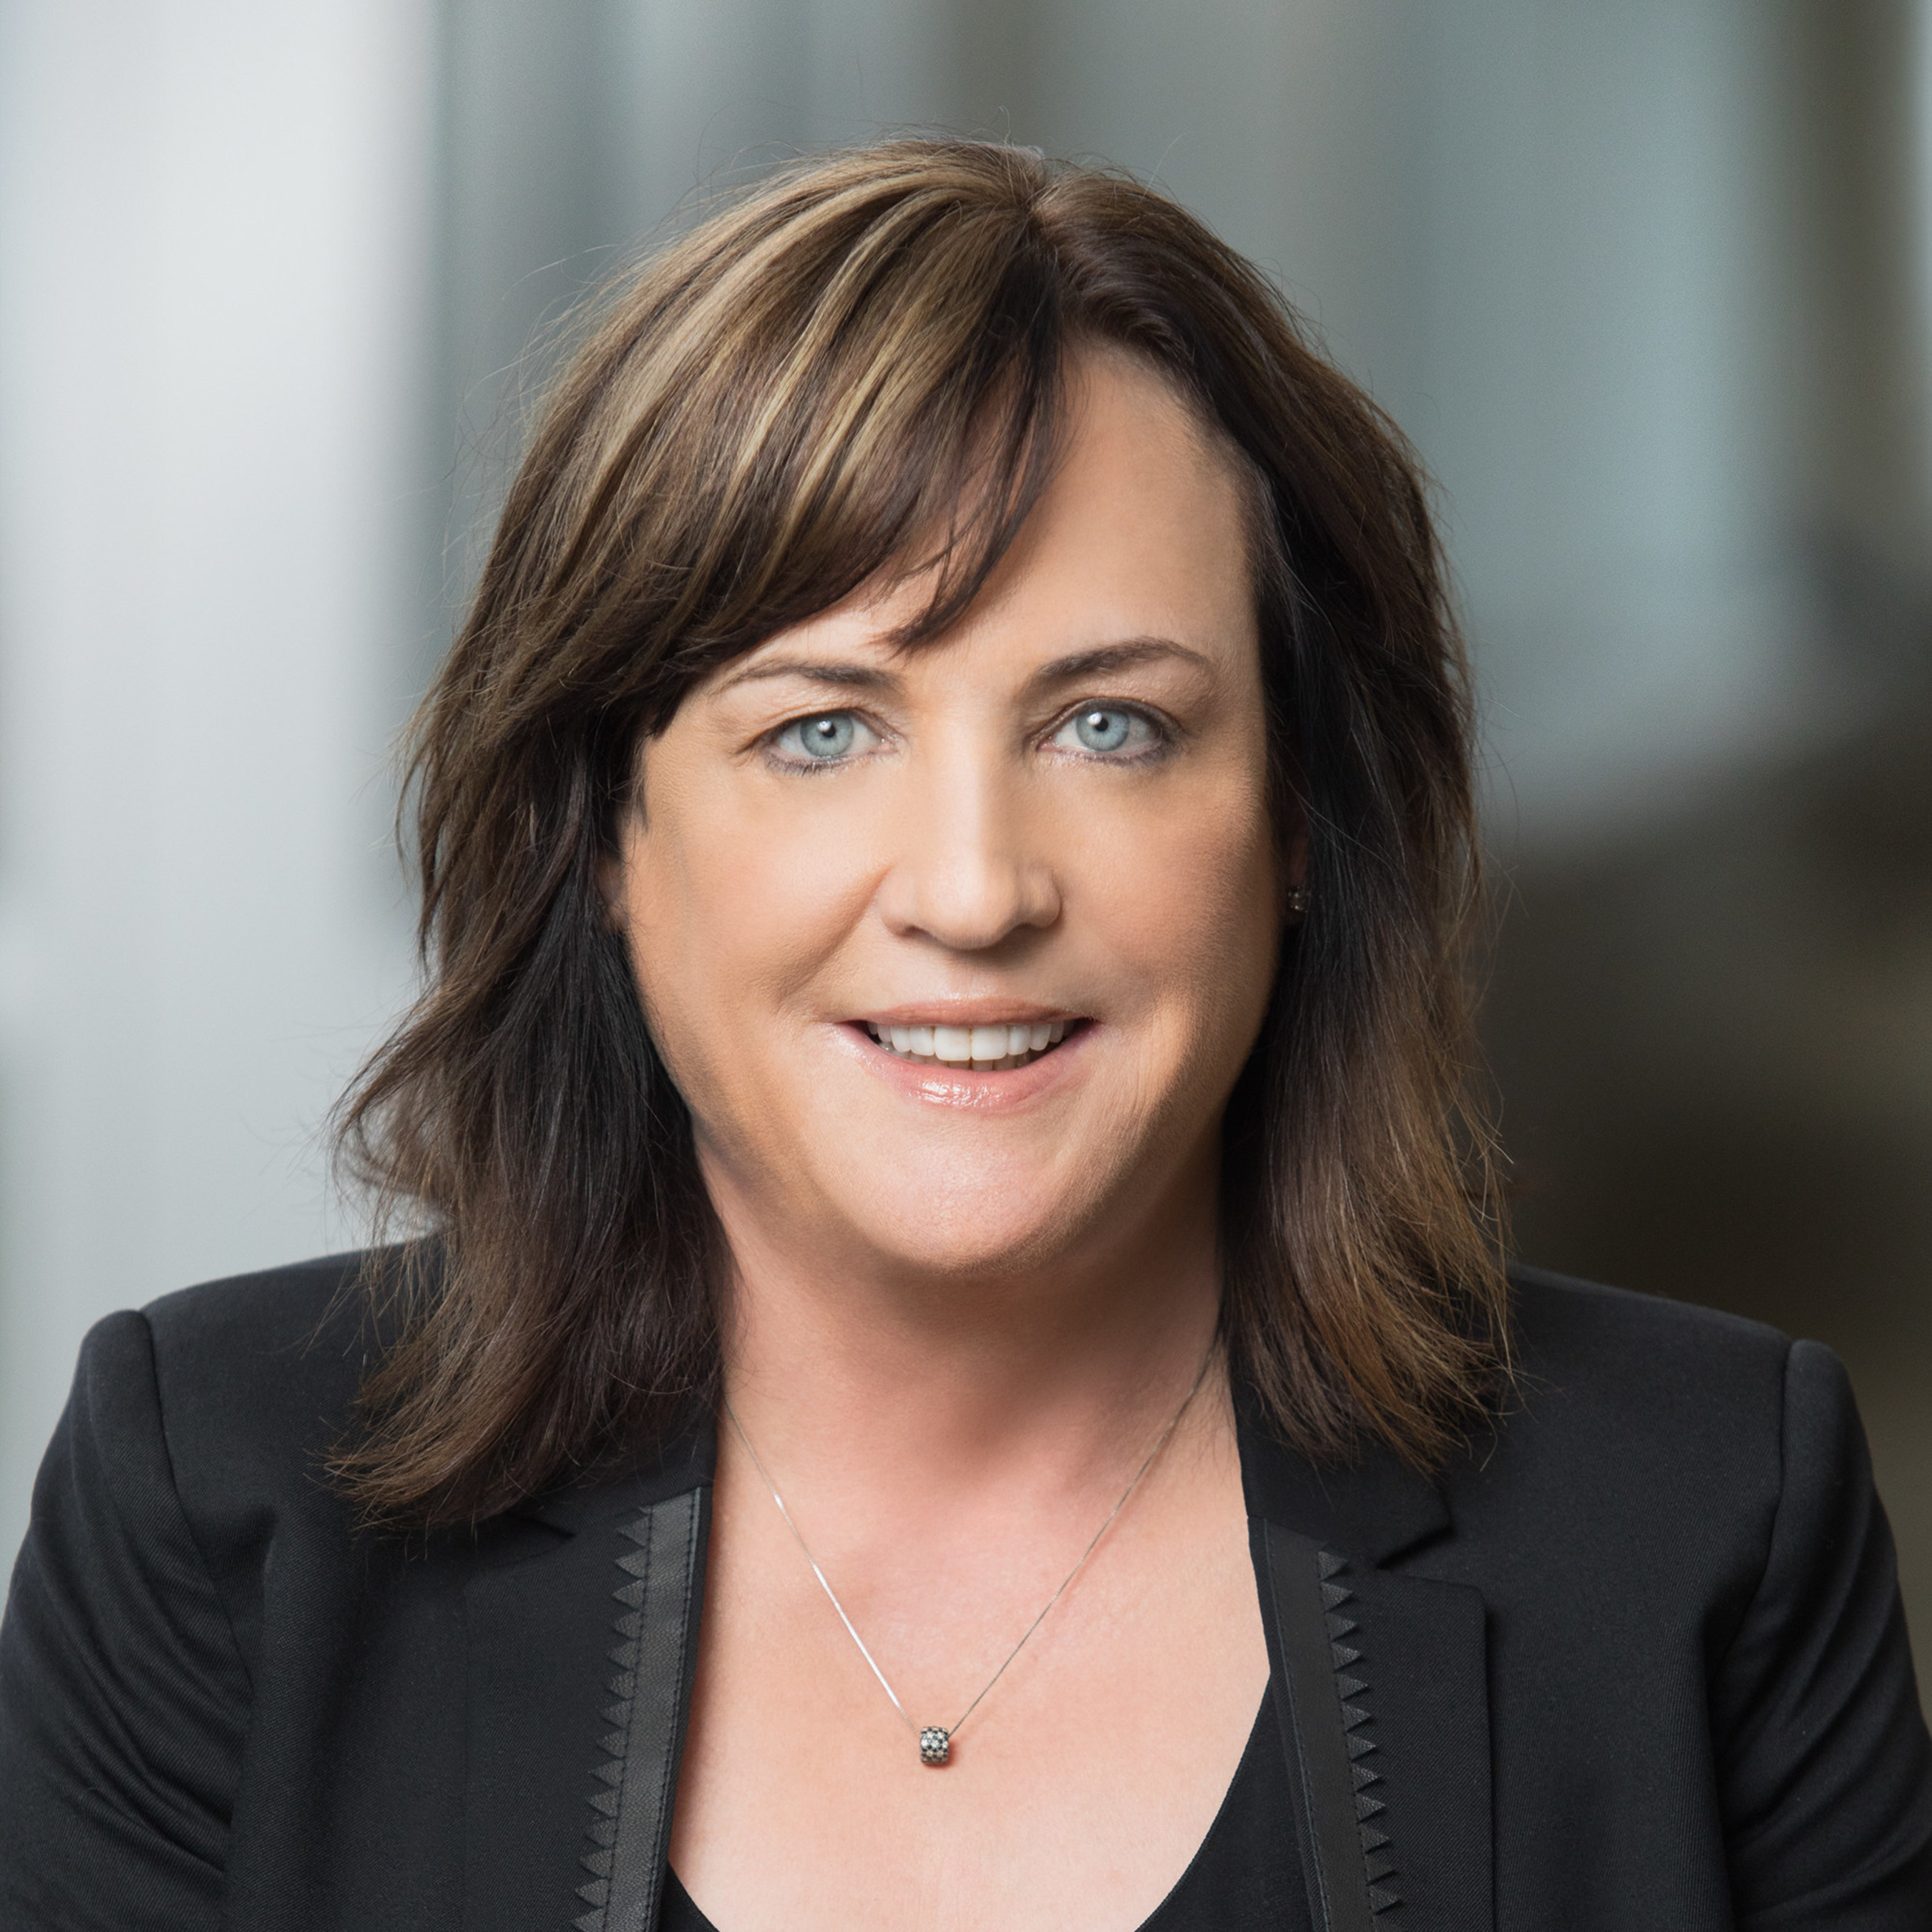 Anne P. Noonan, Named President and CEO, OMNOVA Solutions Effective December 1, 2016